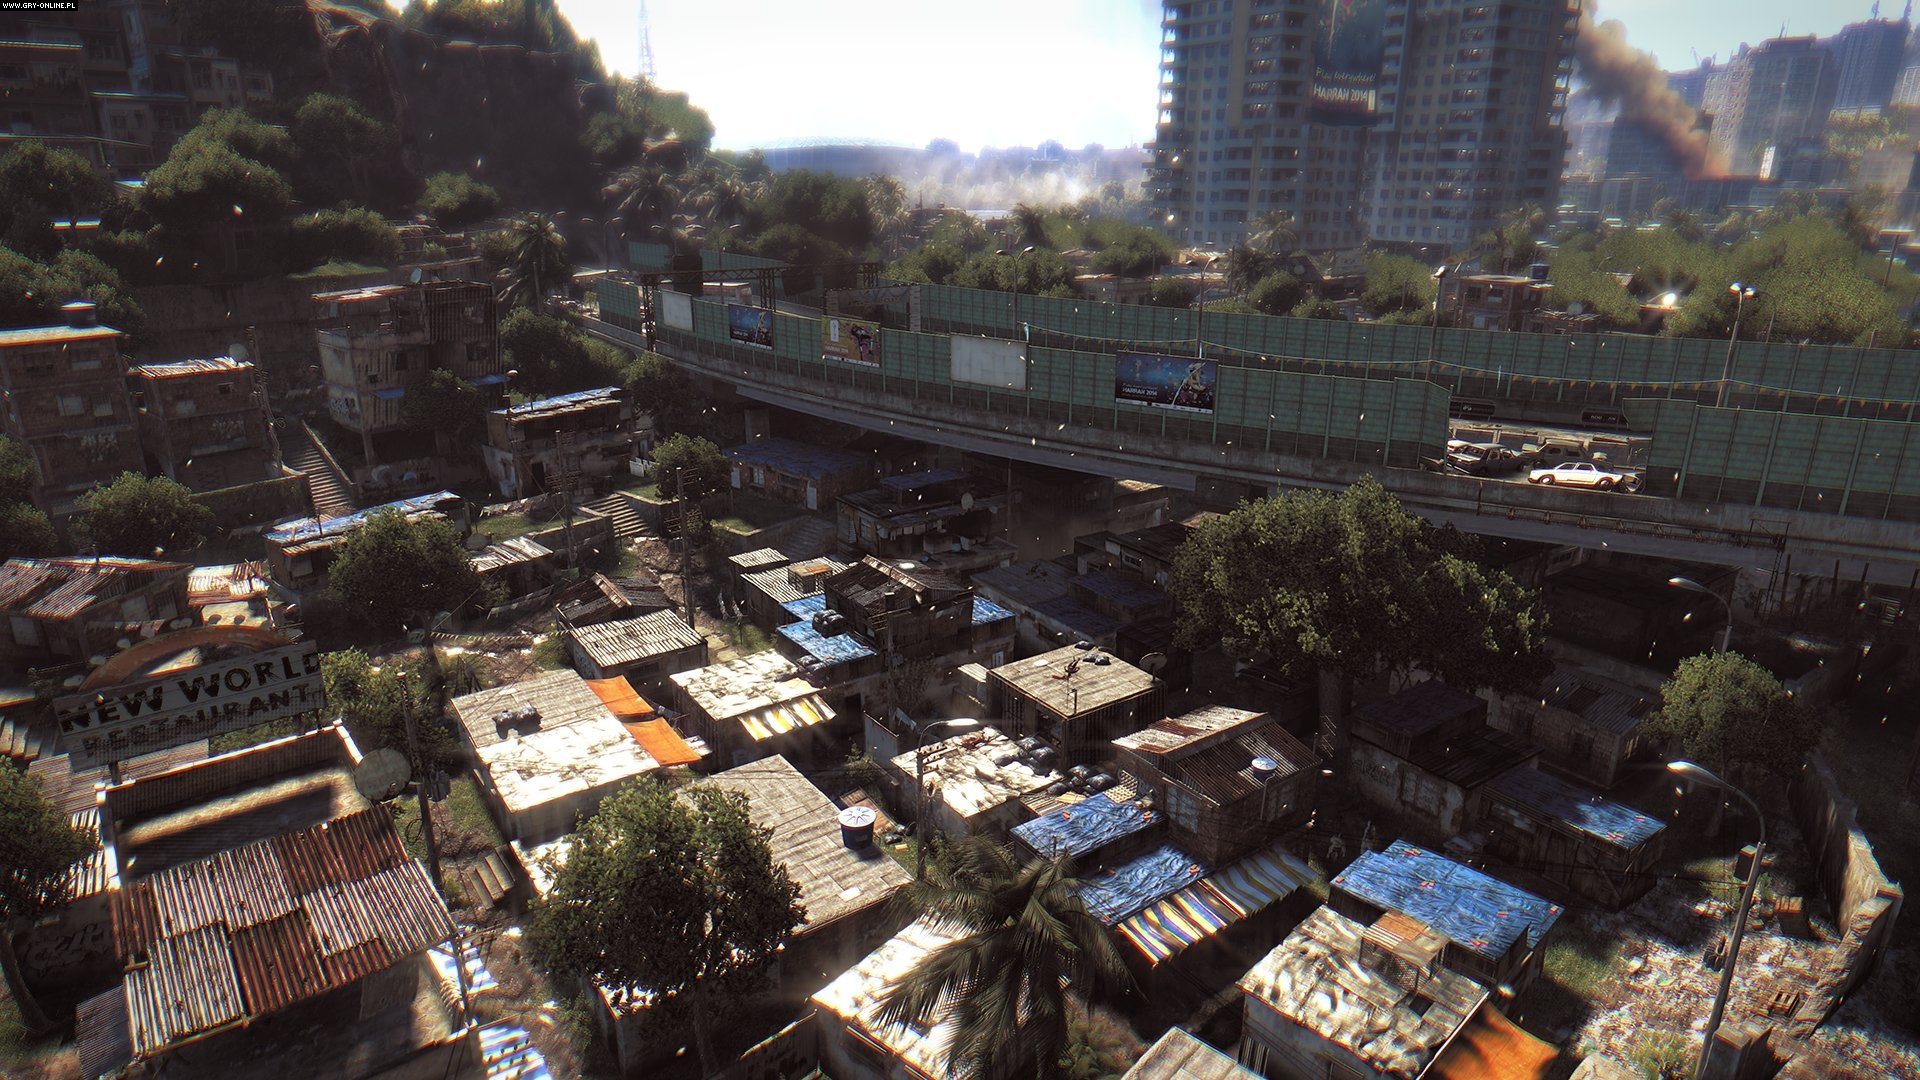 video game, dying light